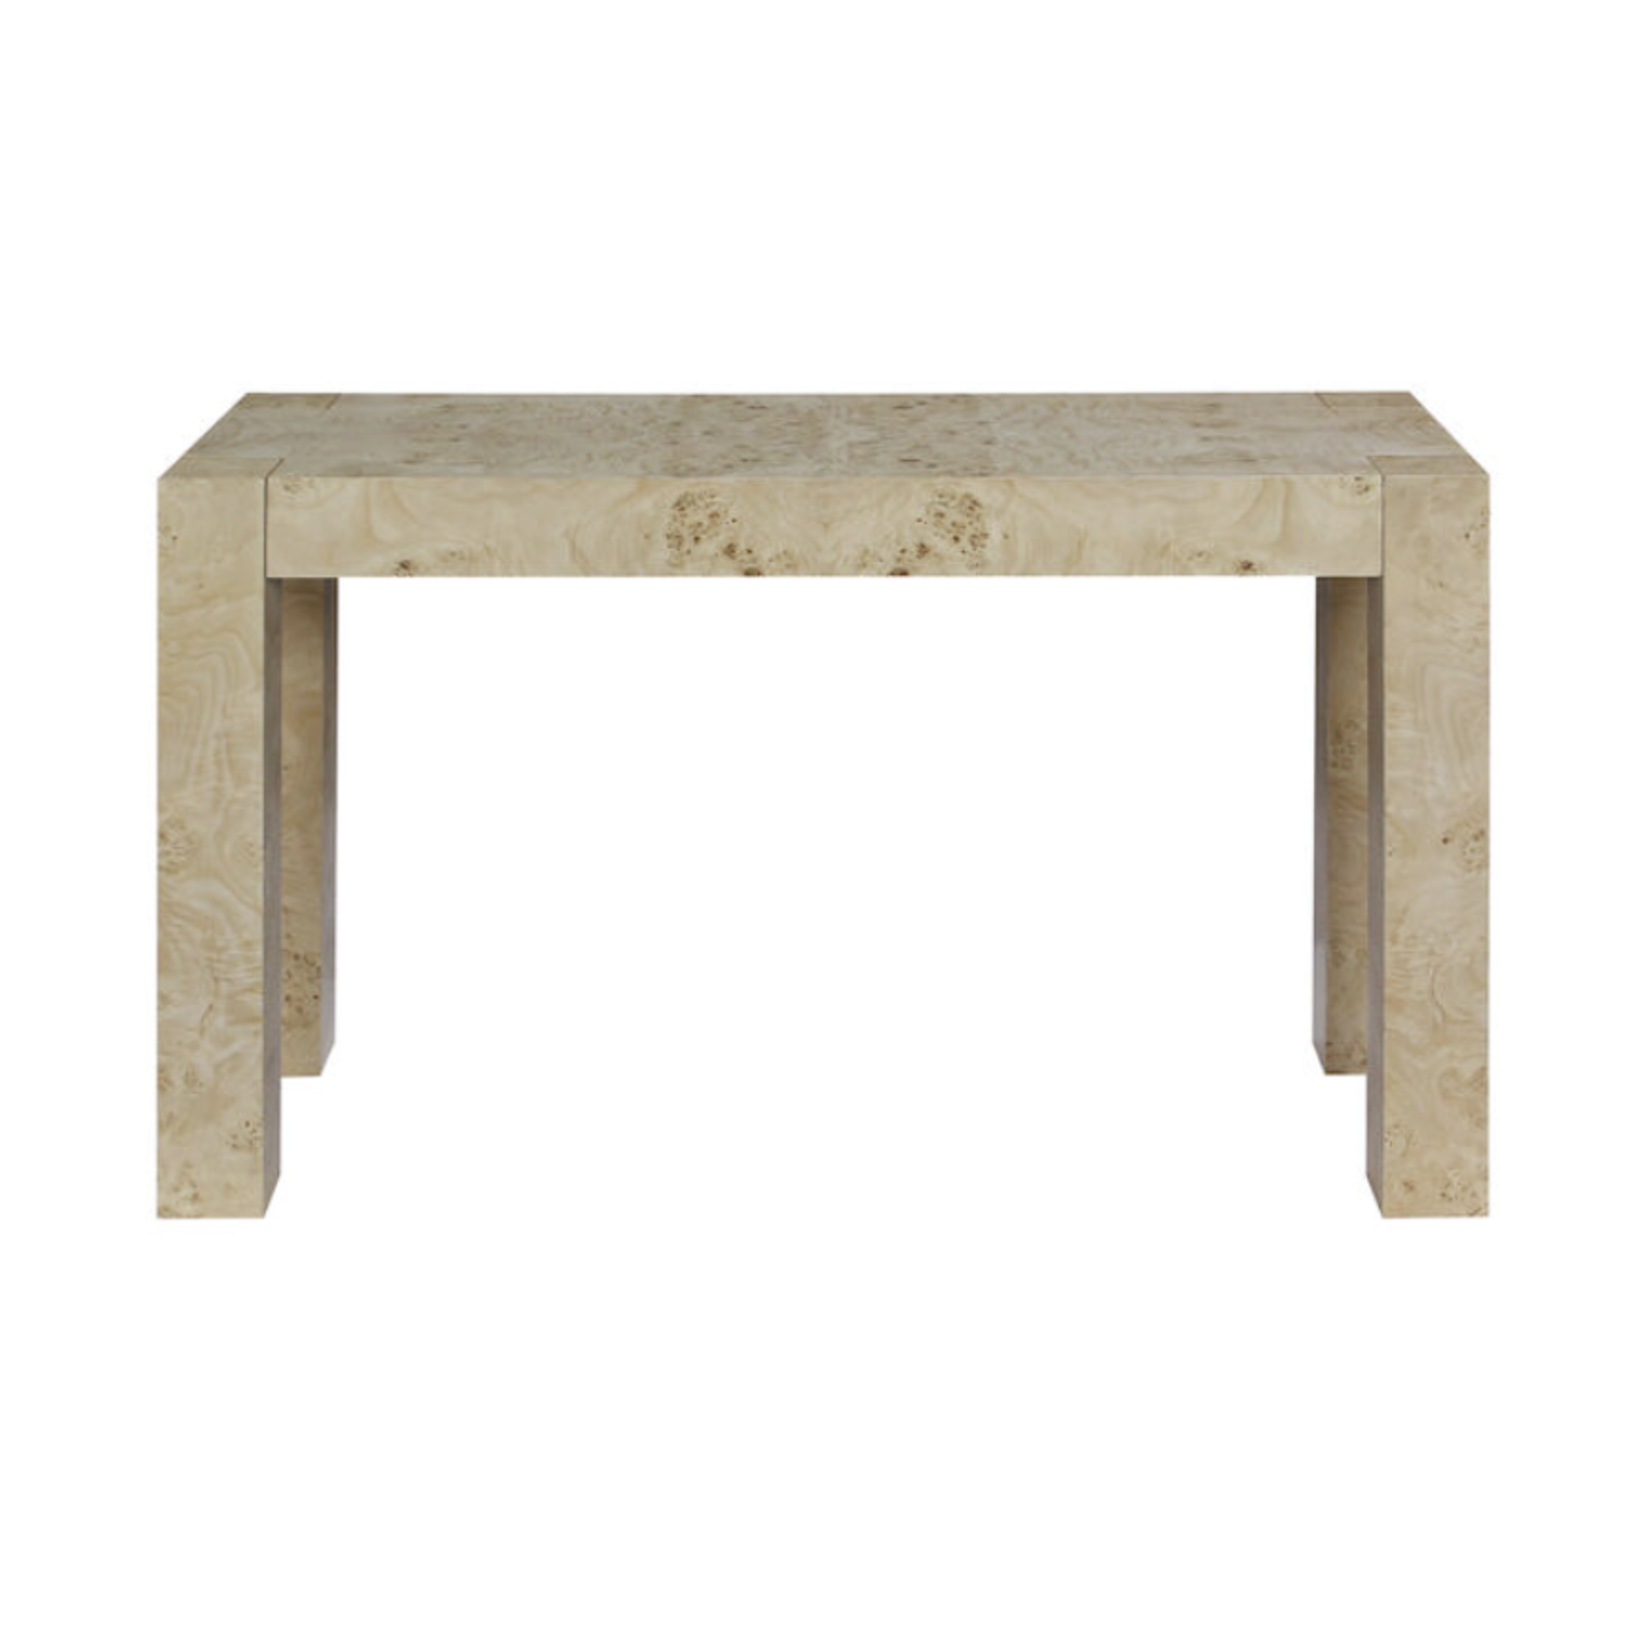 Outside The Box 50x18x30 Bromo Mindi Wood Bleached Console Table